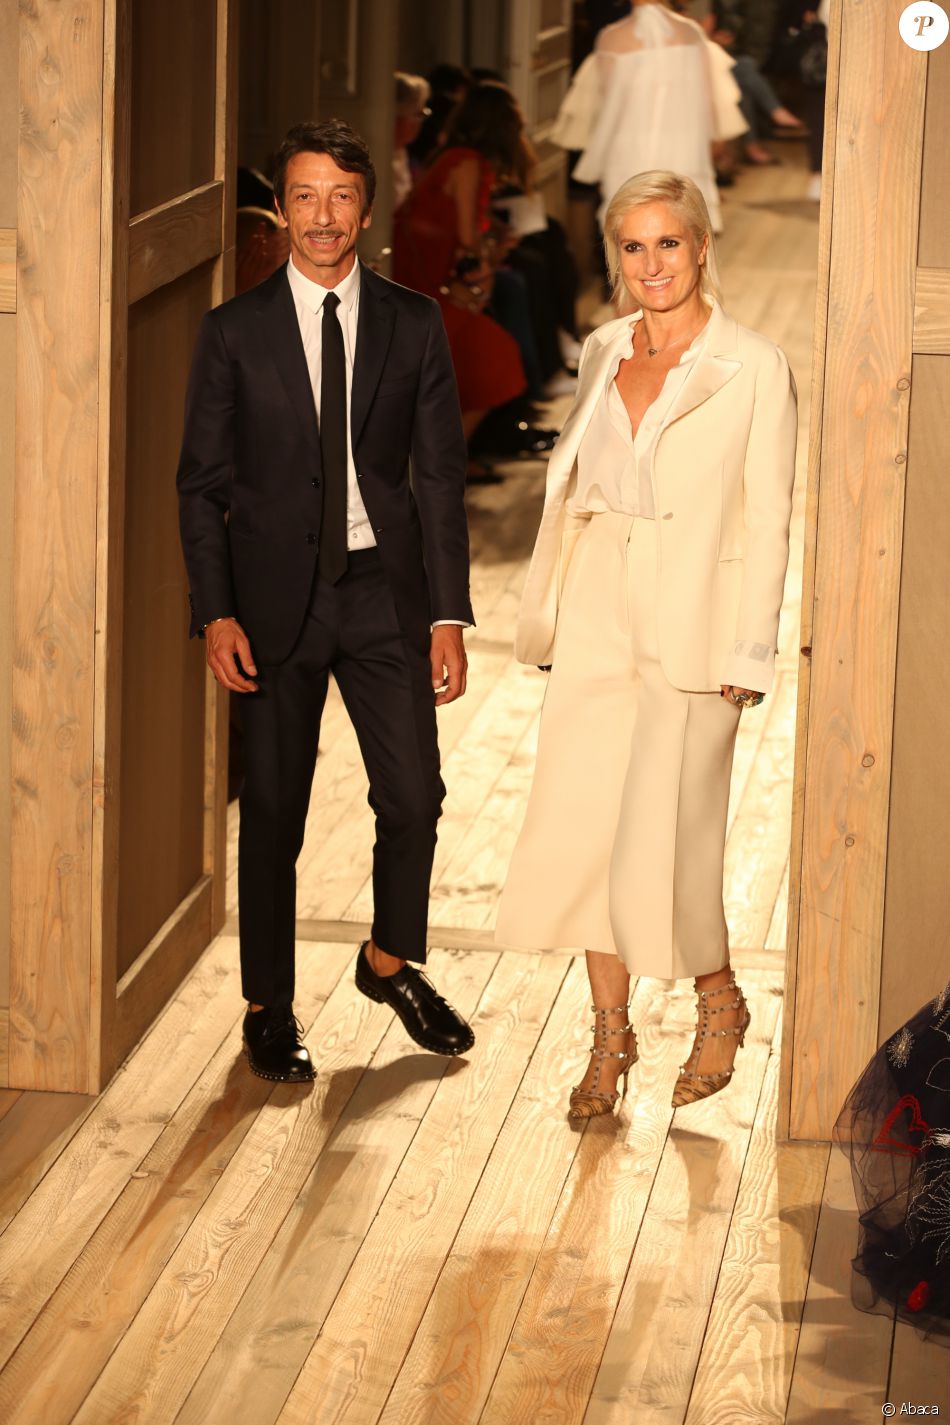 Maria Grazia Chiuri and Pier Paolo Piccioli walks the runway during the Valentino Haute-Couture Fall/Winter 2016/2017 show as part of Fashion Week on July 6, 2016 in Paris, France. Photo by Jerome Domine/ABACAPRESS.COM06/07/2016 - 